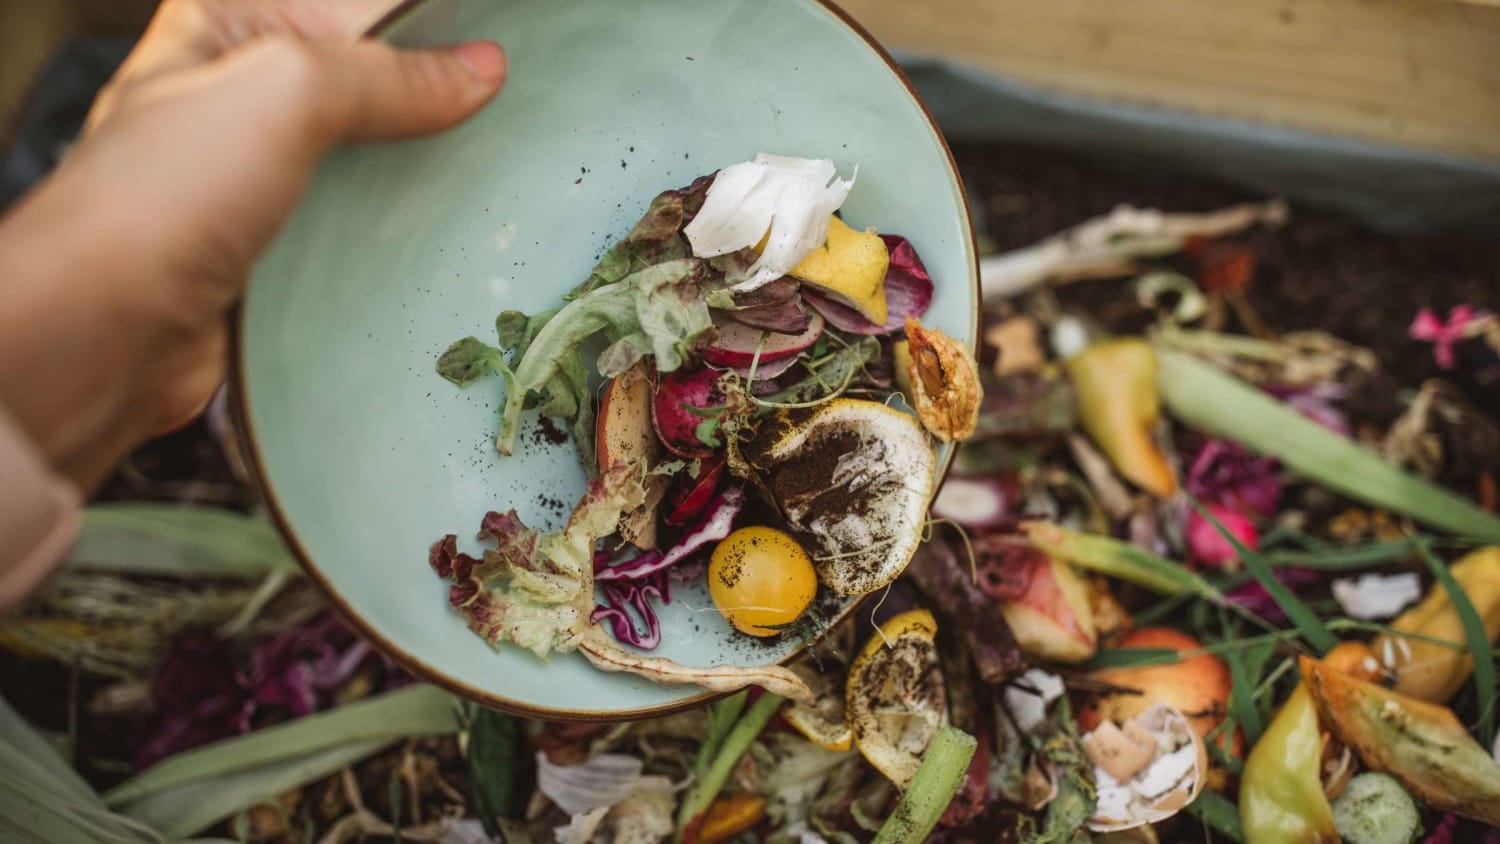 Vermont Just Banned Residents From Throwing Food Scraps in the Trash